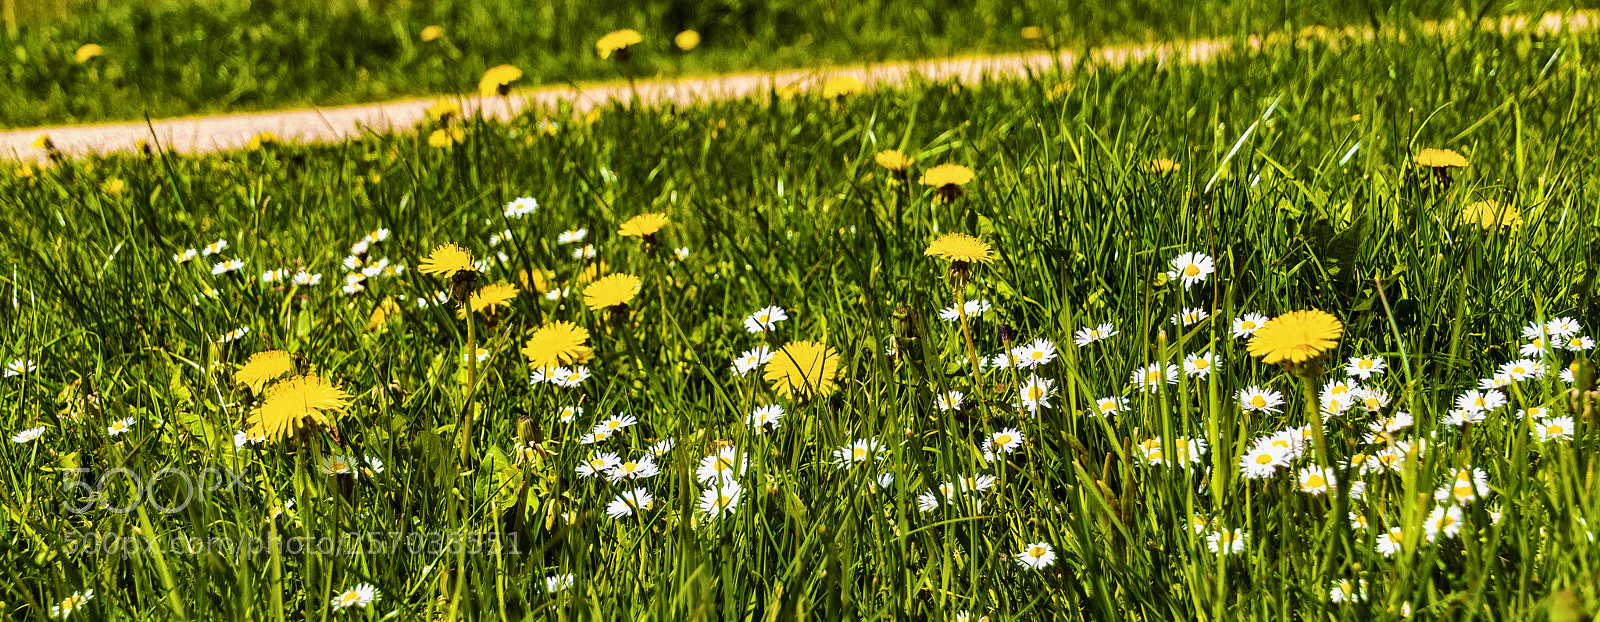 Sony ILCA-77M2 sample photo. Meadow with dandelions and photography